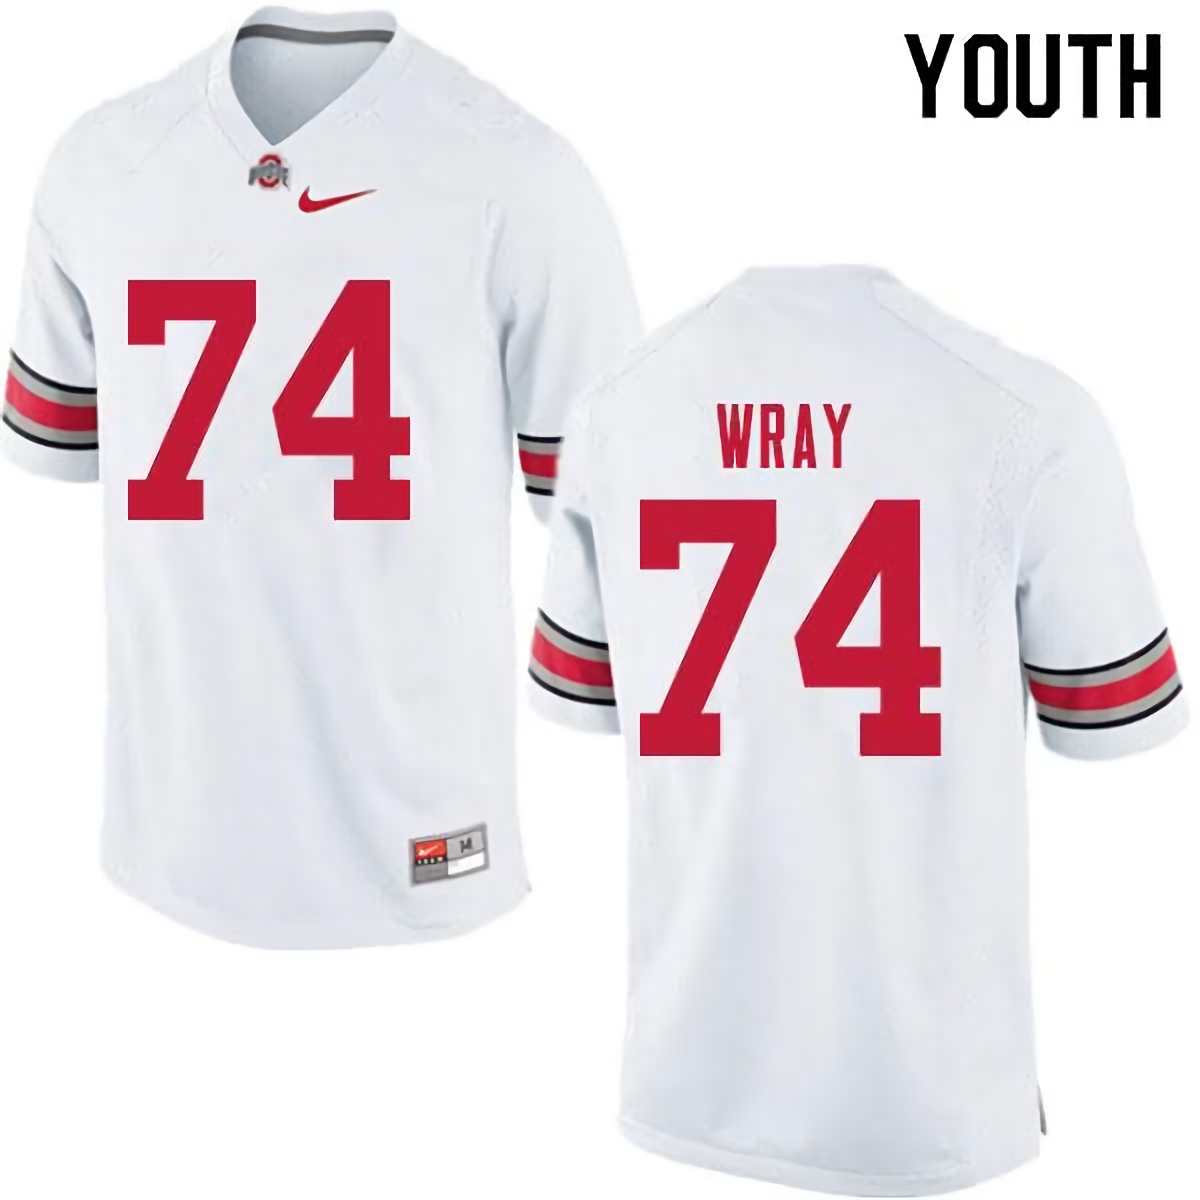 Max Wray Ohio State Buckeyes Youth NCAA #74 Nike White College Stitched Football Jersey QZY8256RA